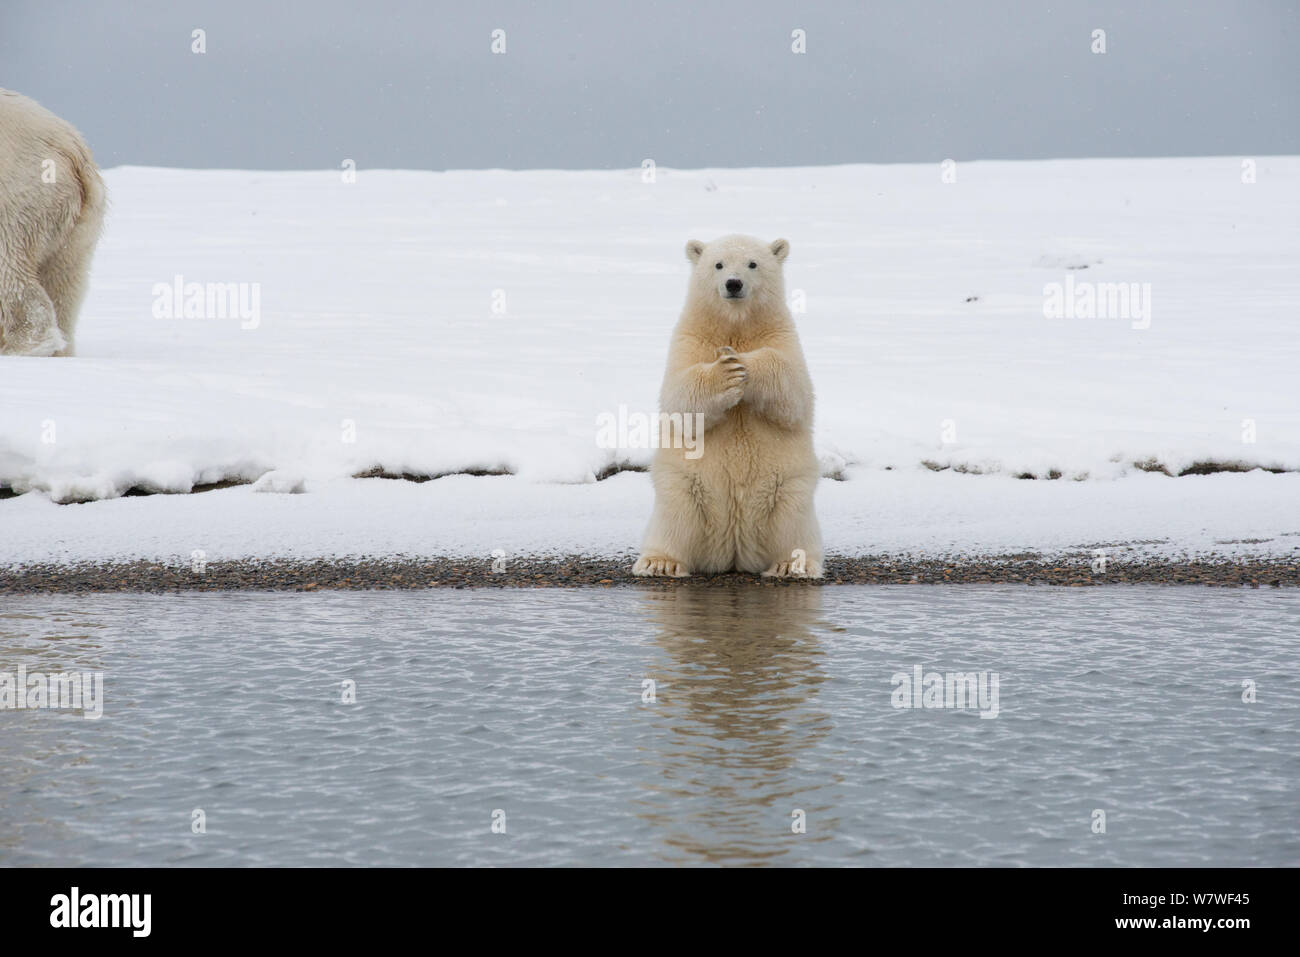 Polar bear (Ursus maritimus) spring cub sitting up on its haunches and scratches itself, on a barrier island during autumn freeze up, Bernard Spit, North Slope, Alaska, September Stock Photo